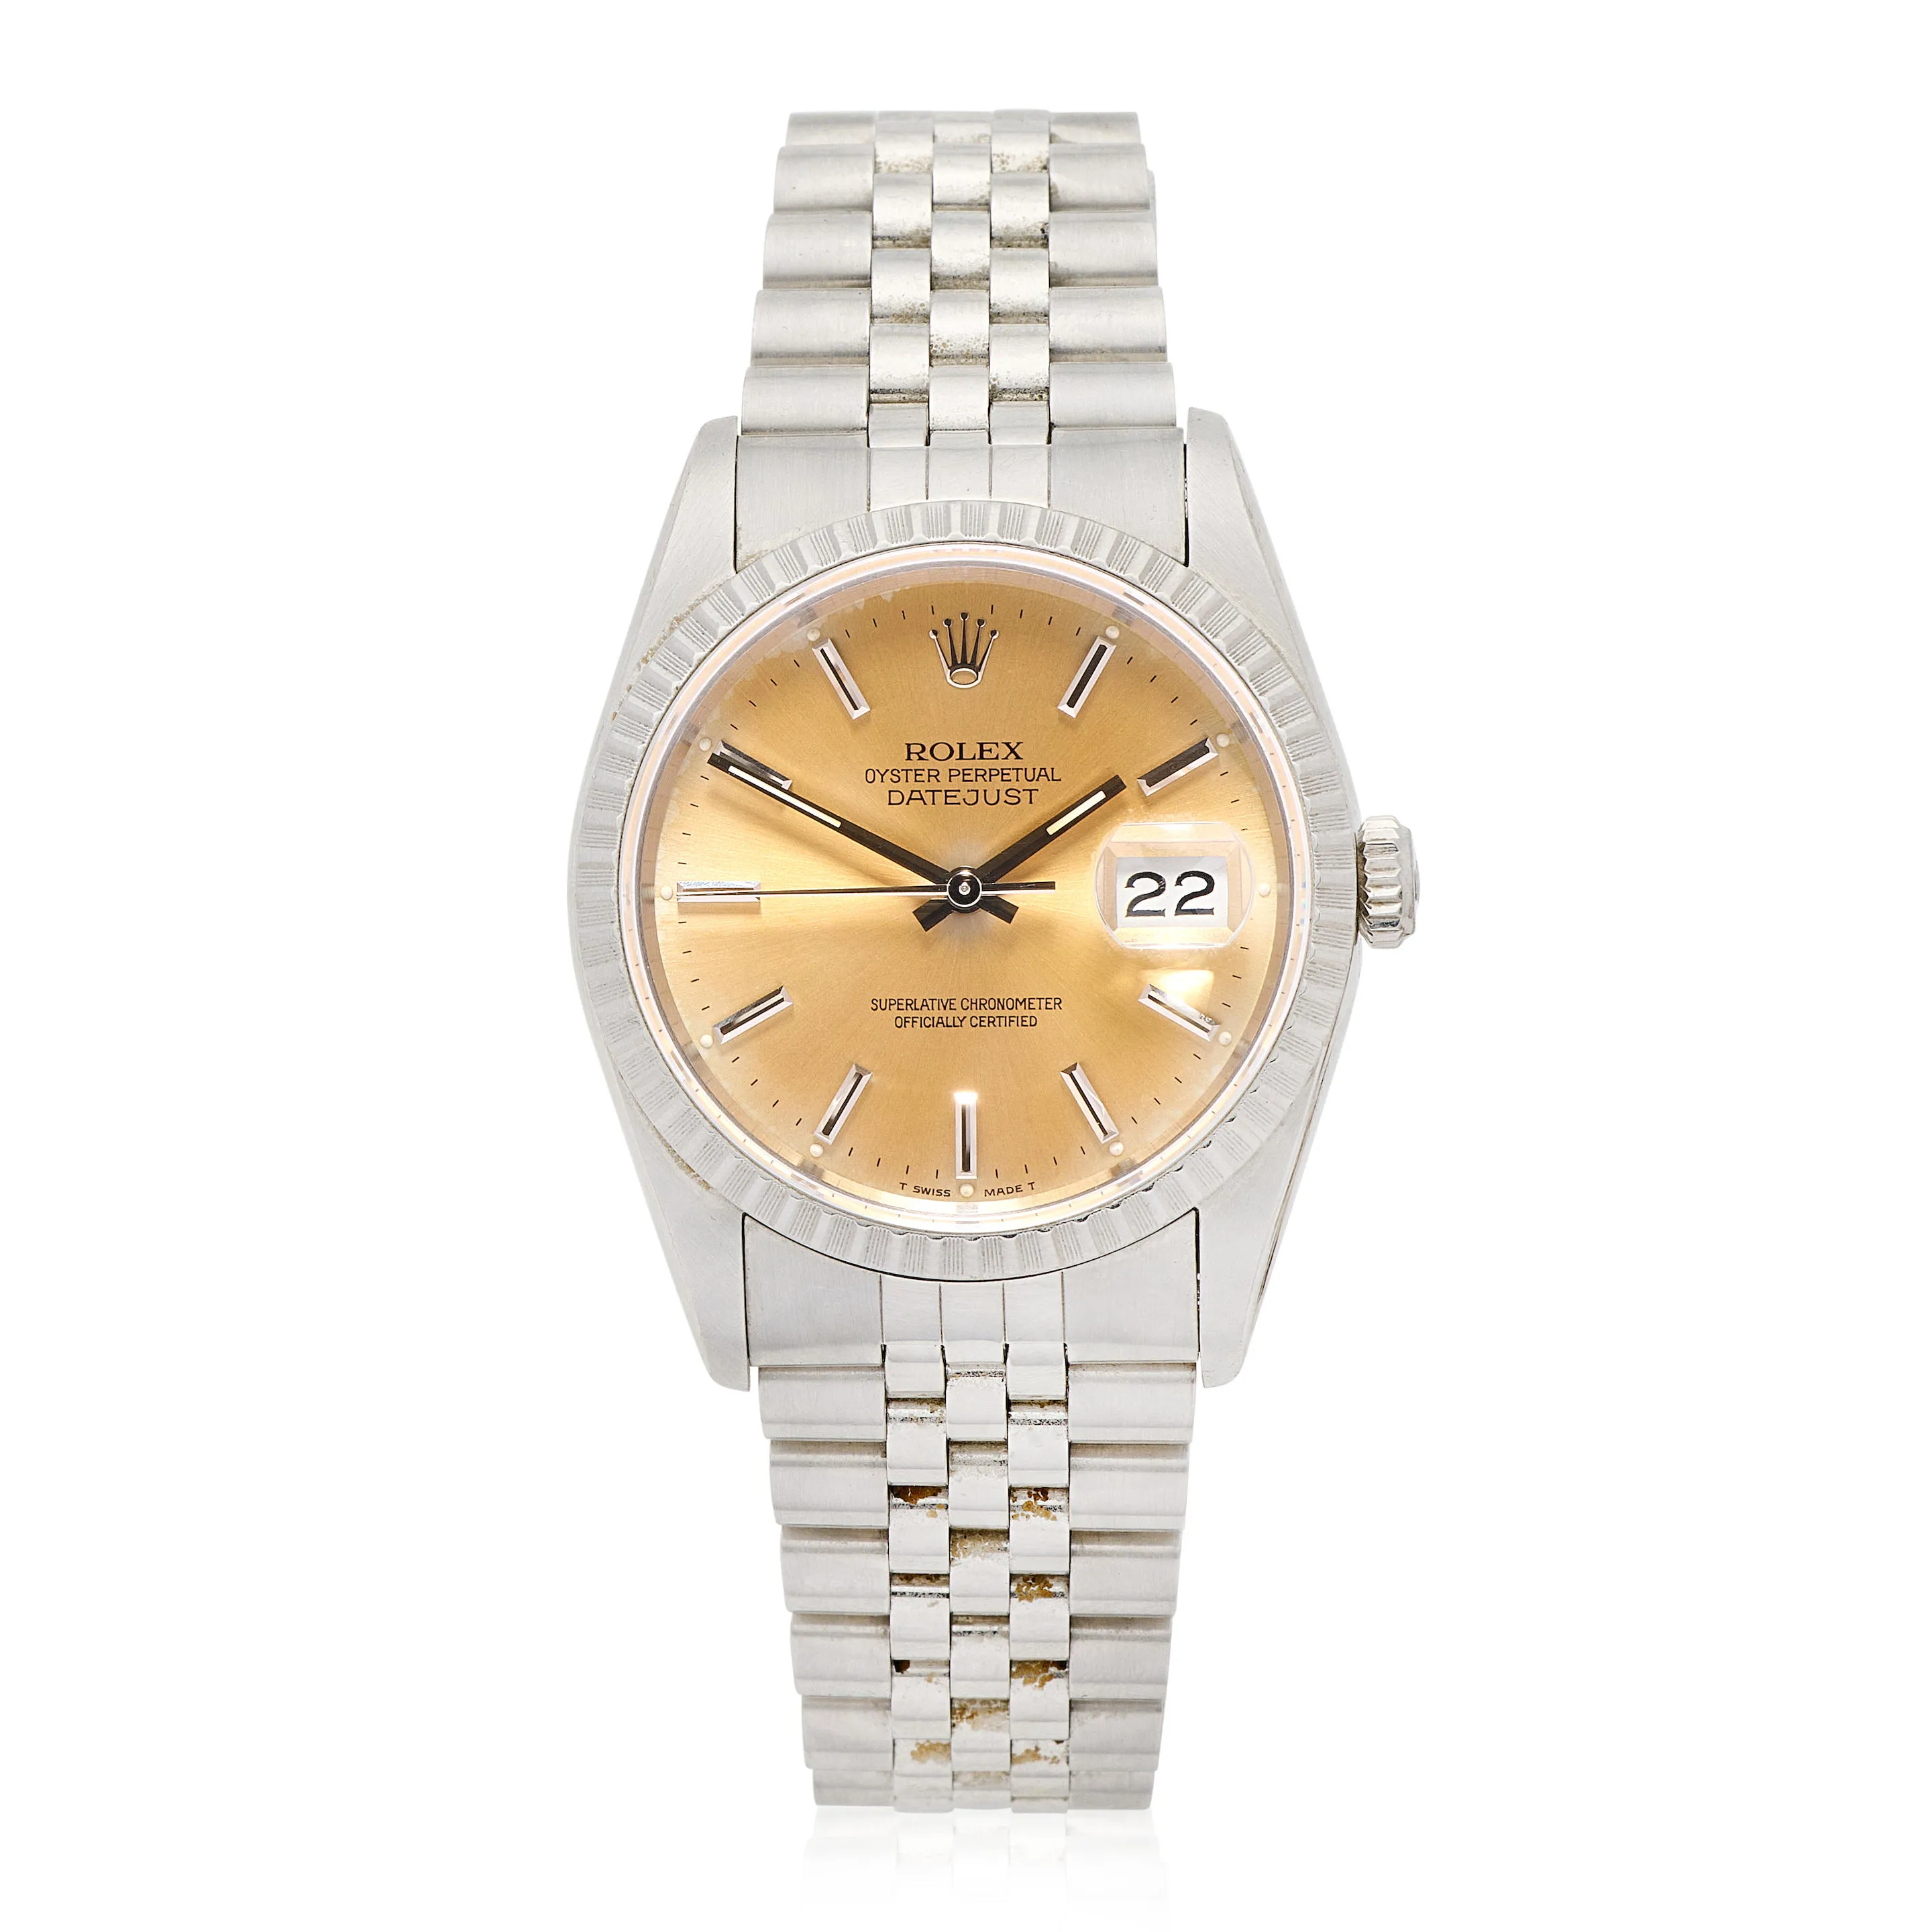 Rolex Datejust 16220 36mm Stainless steel Tropical